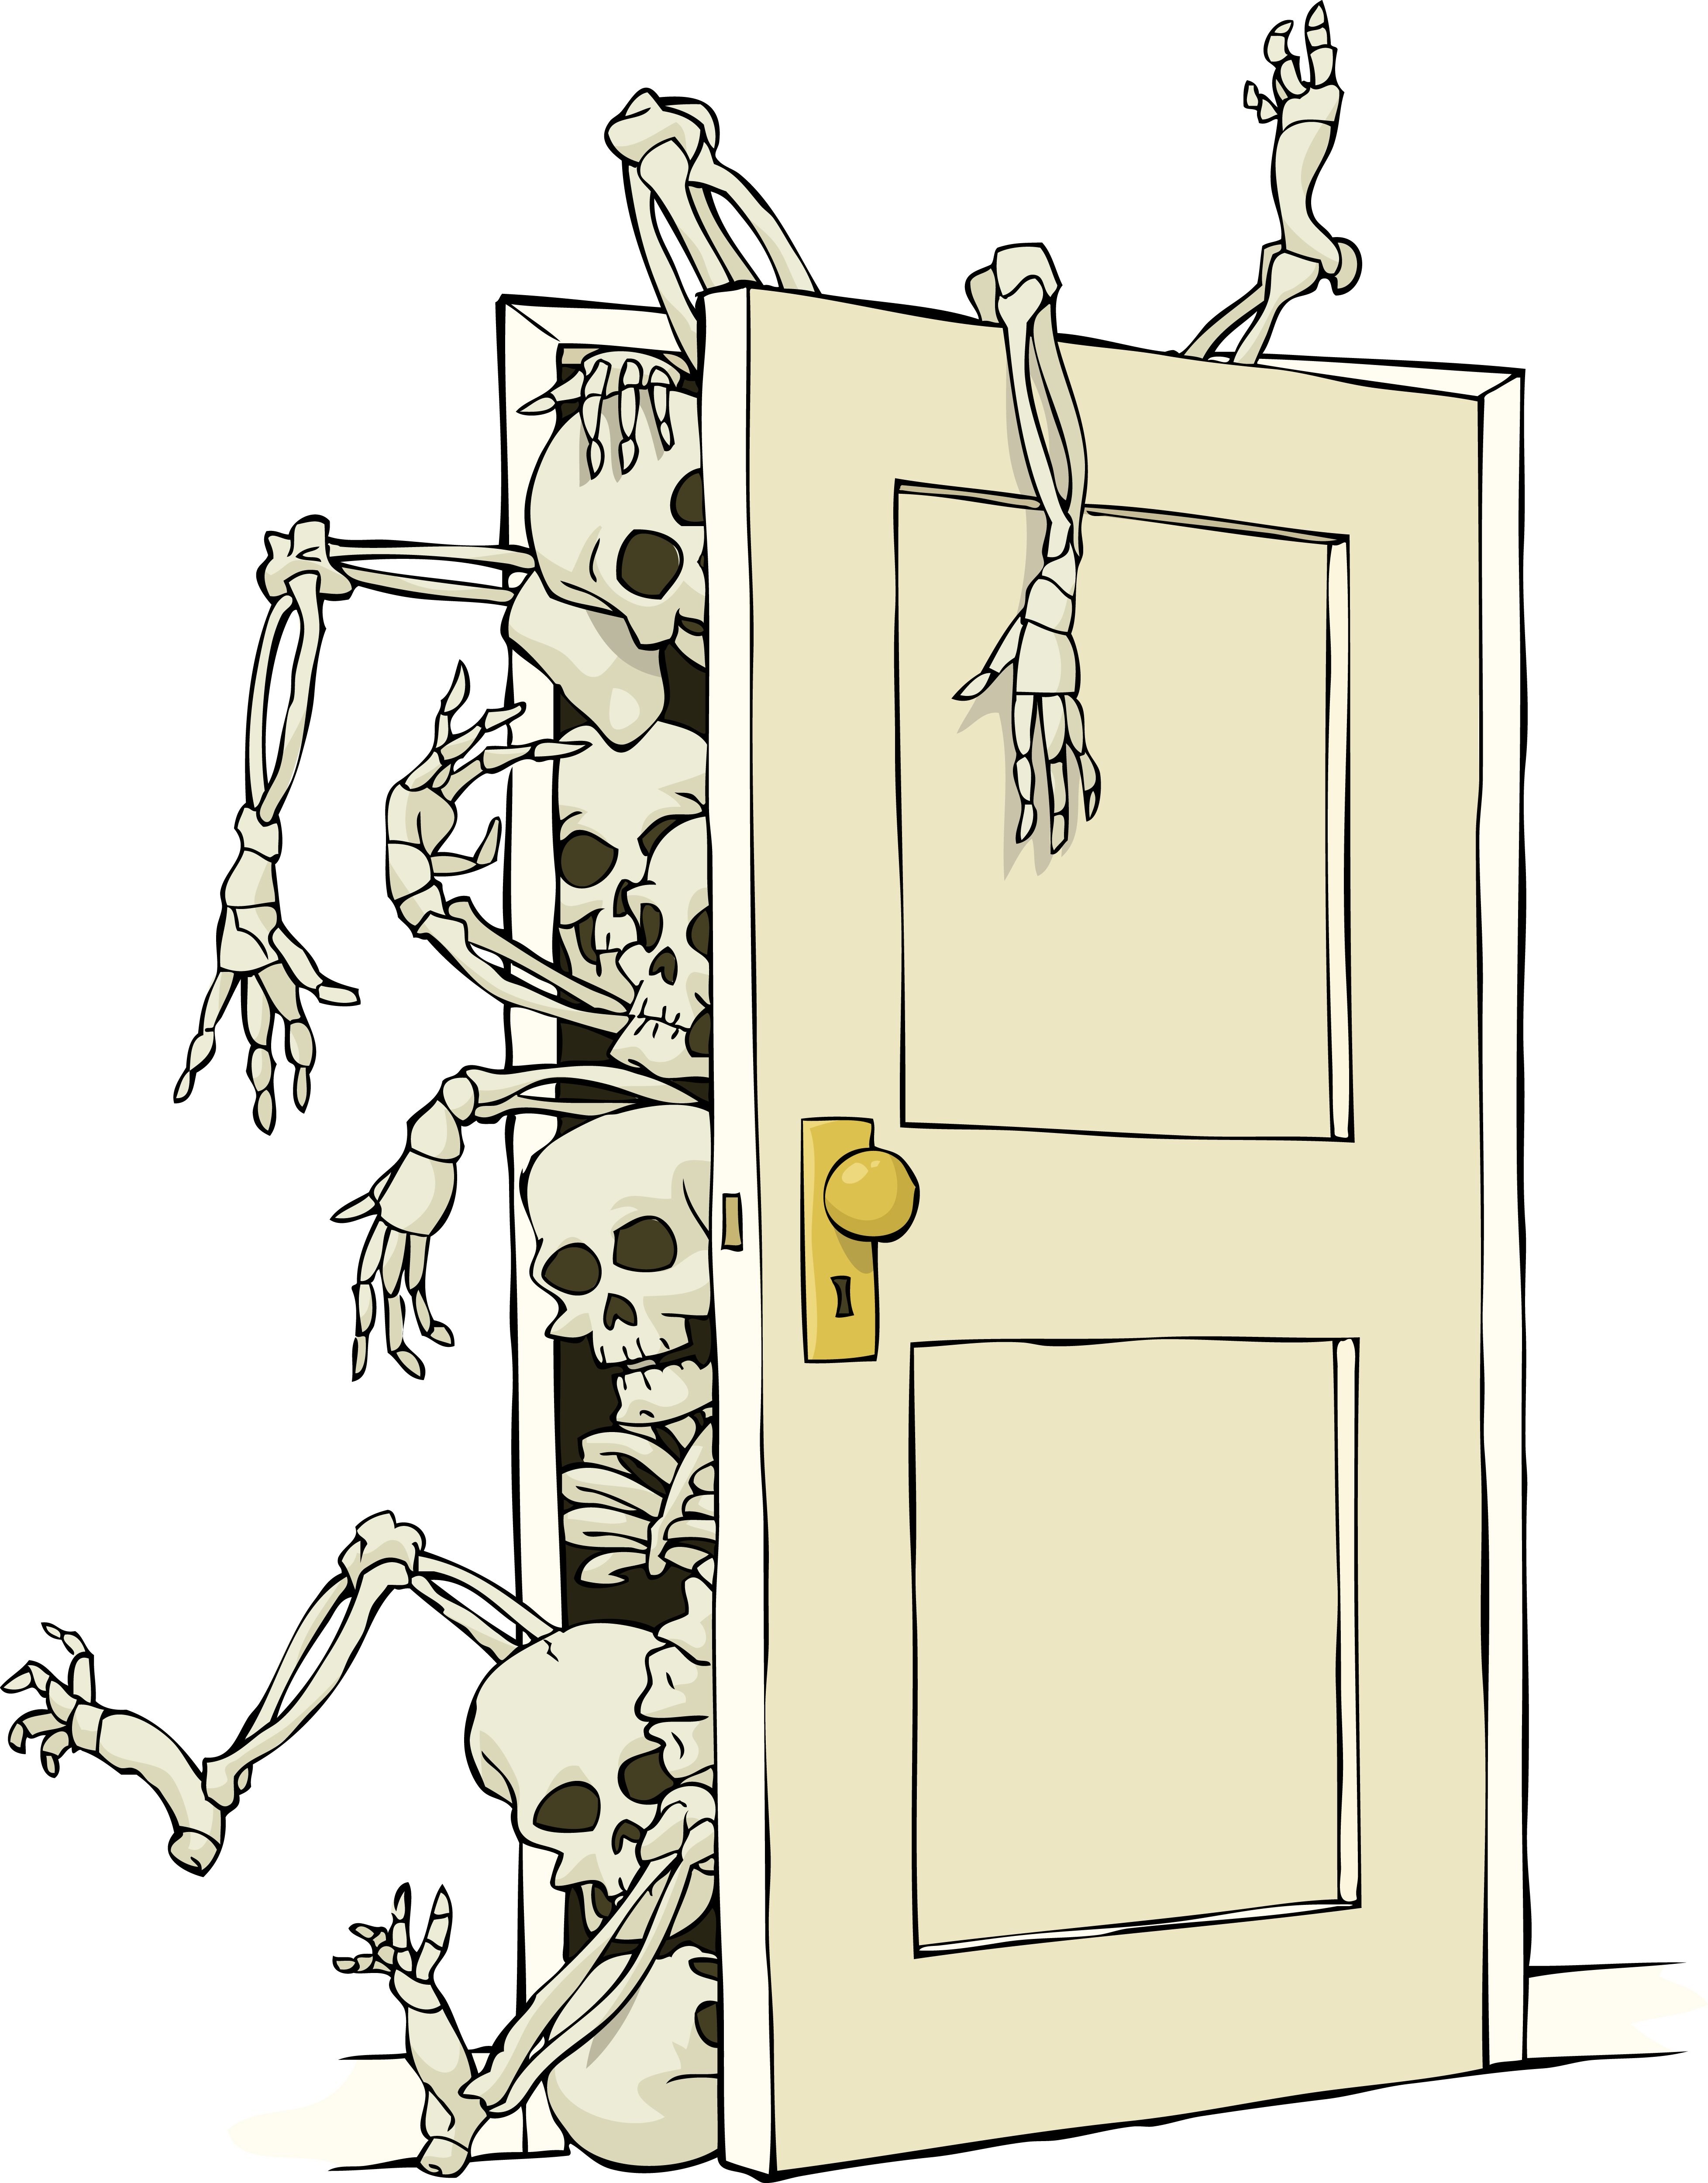 The Skeletons in Your Implementation Closet